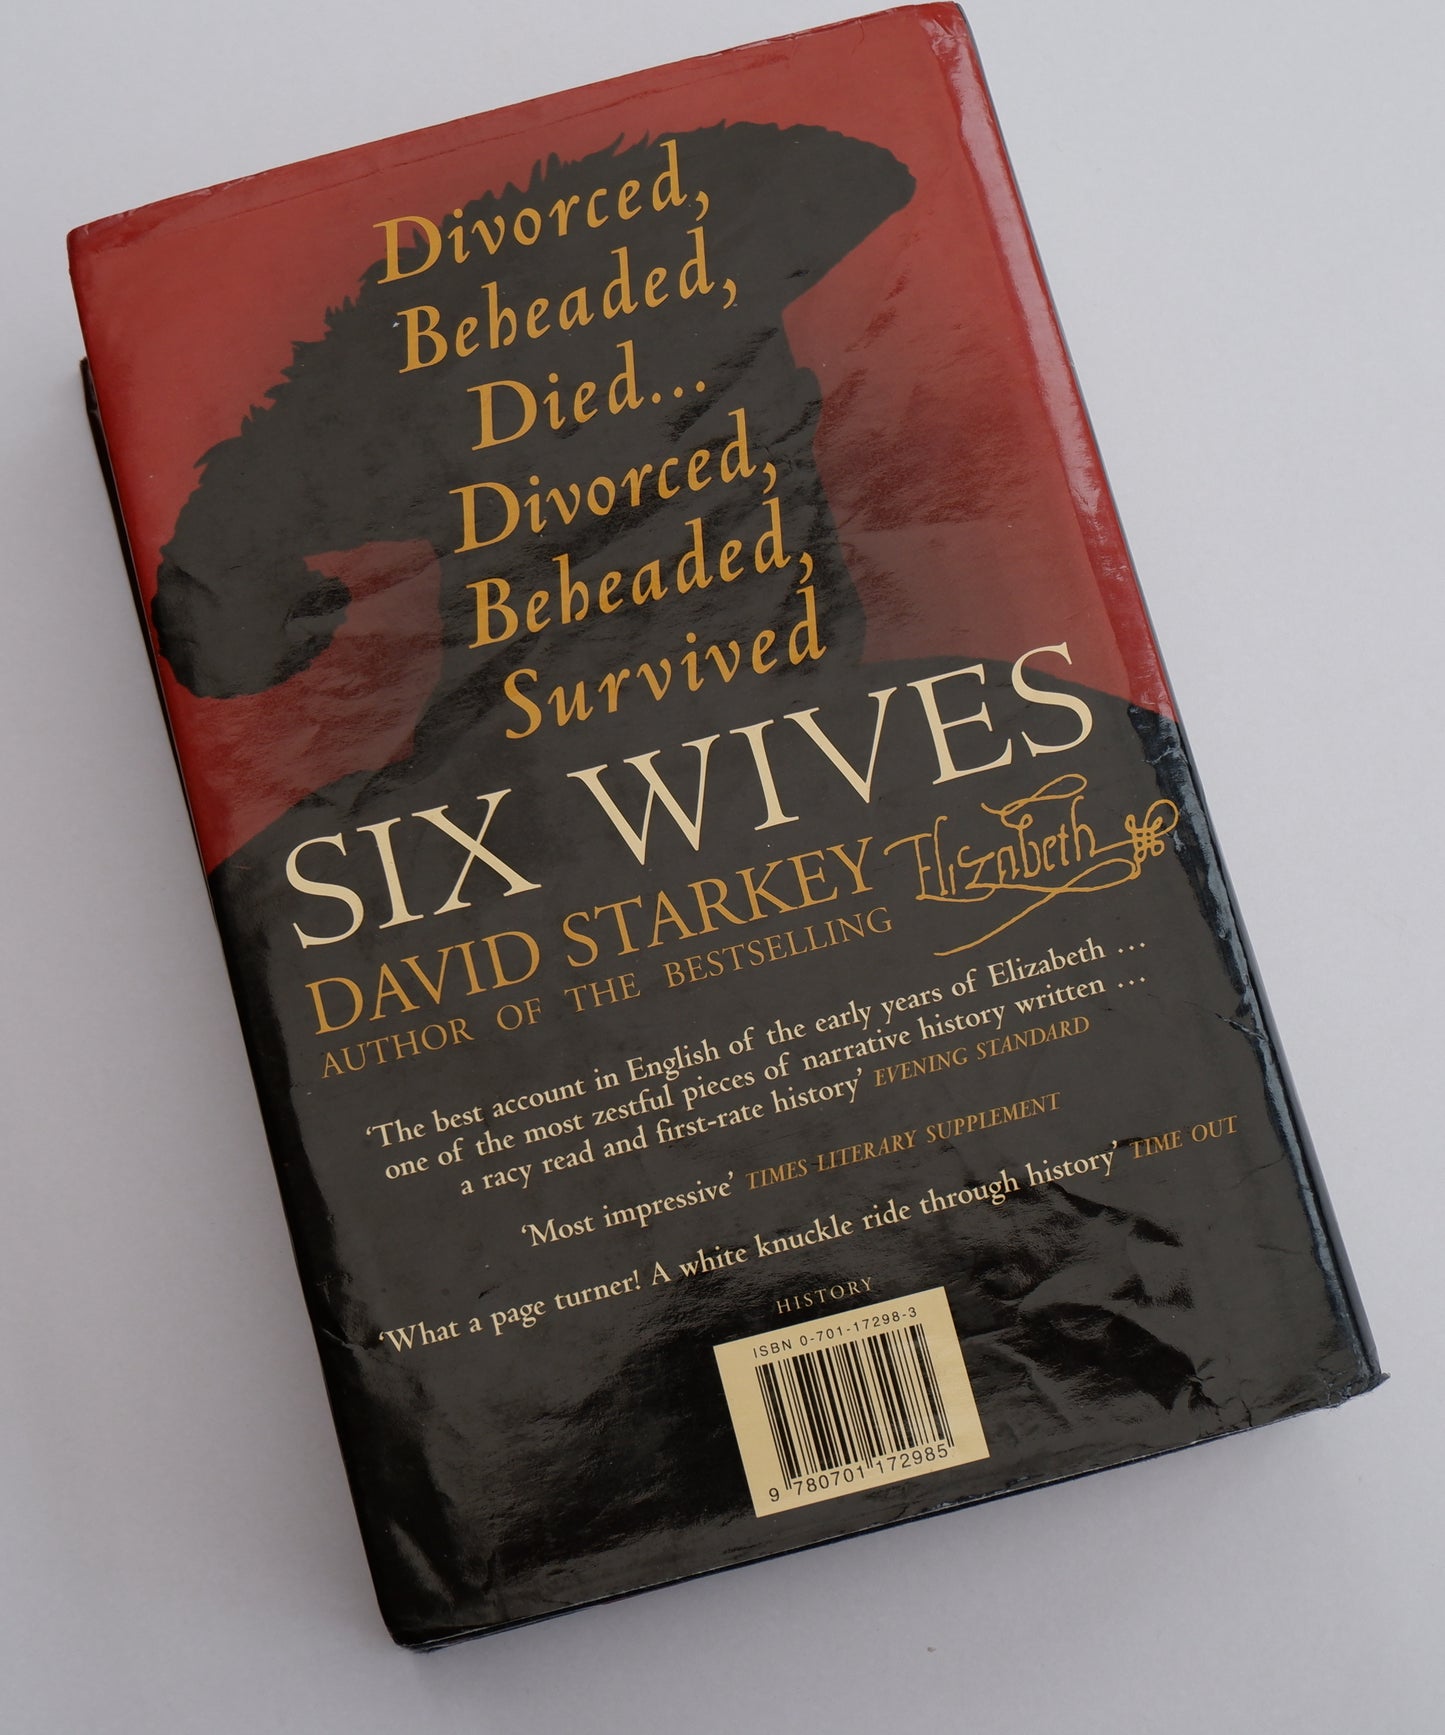 Six Wives: The Queens of Henry VIII - David Starkey